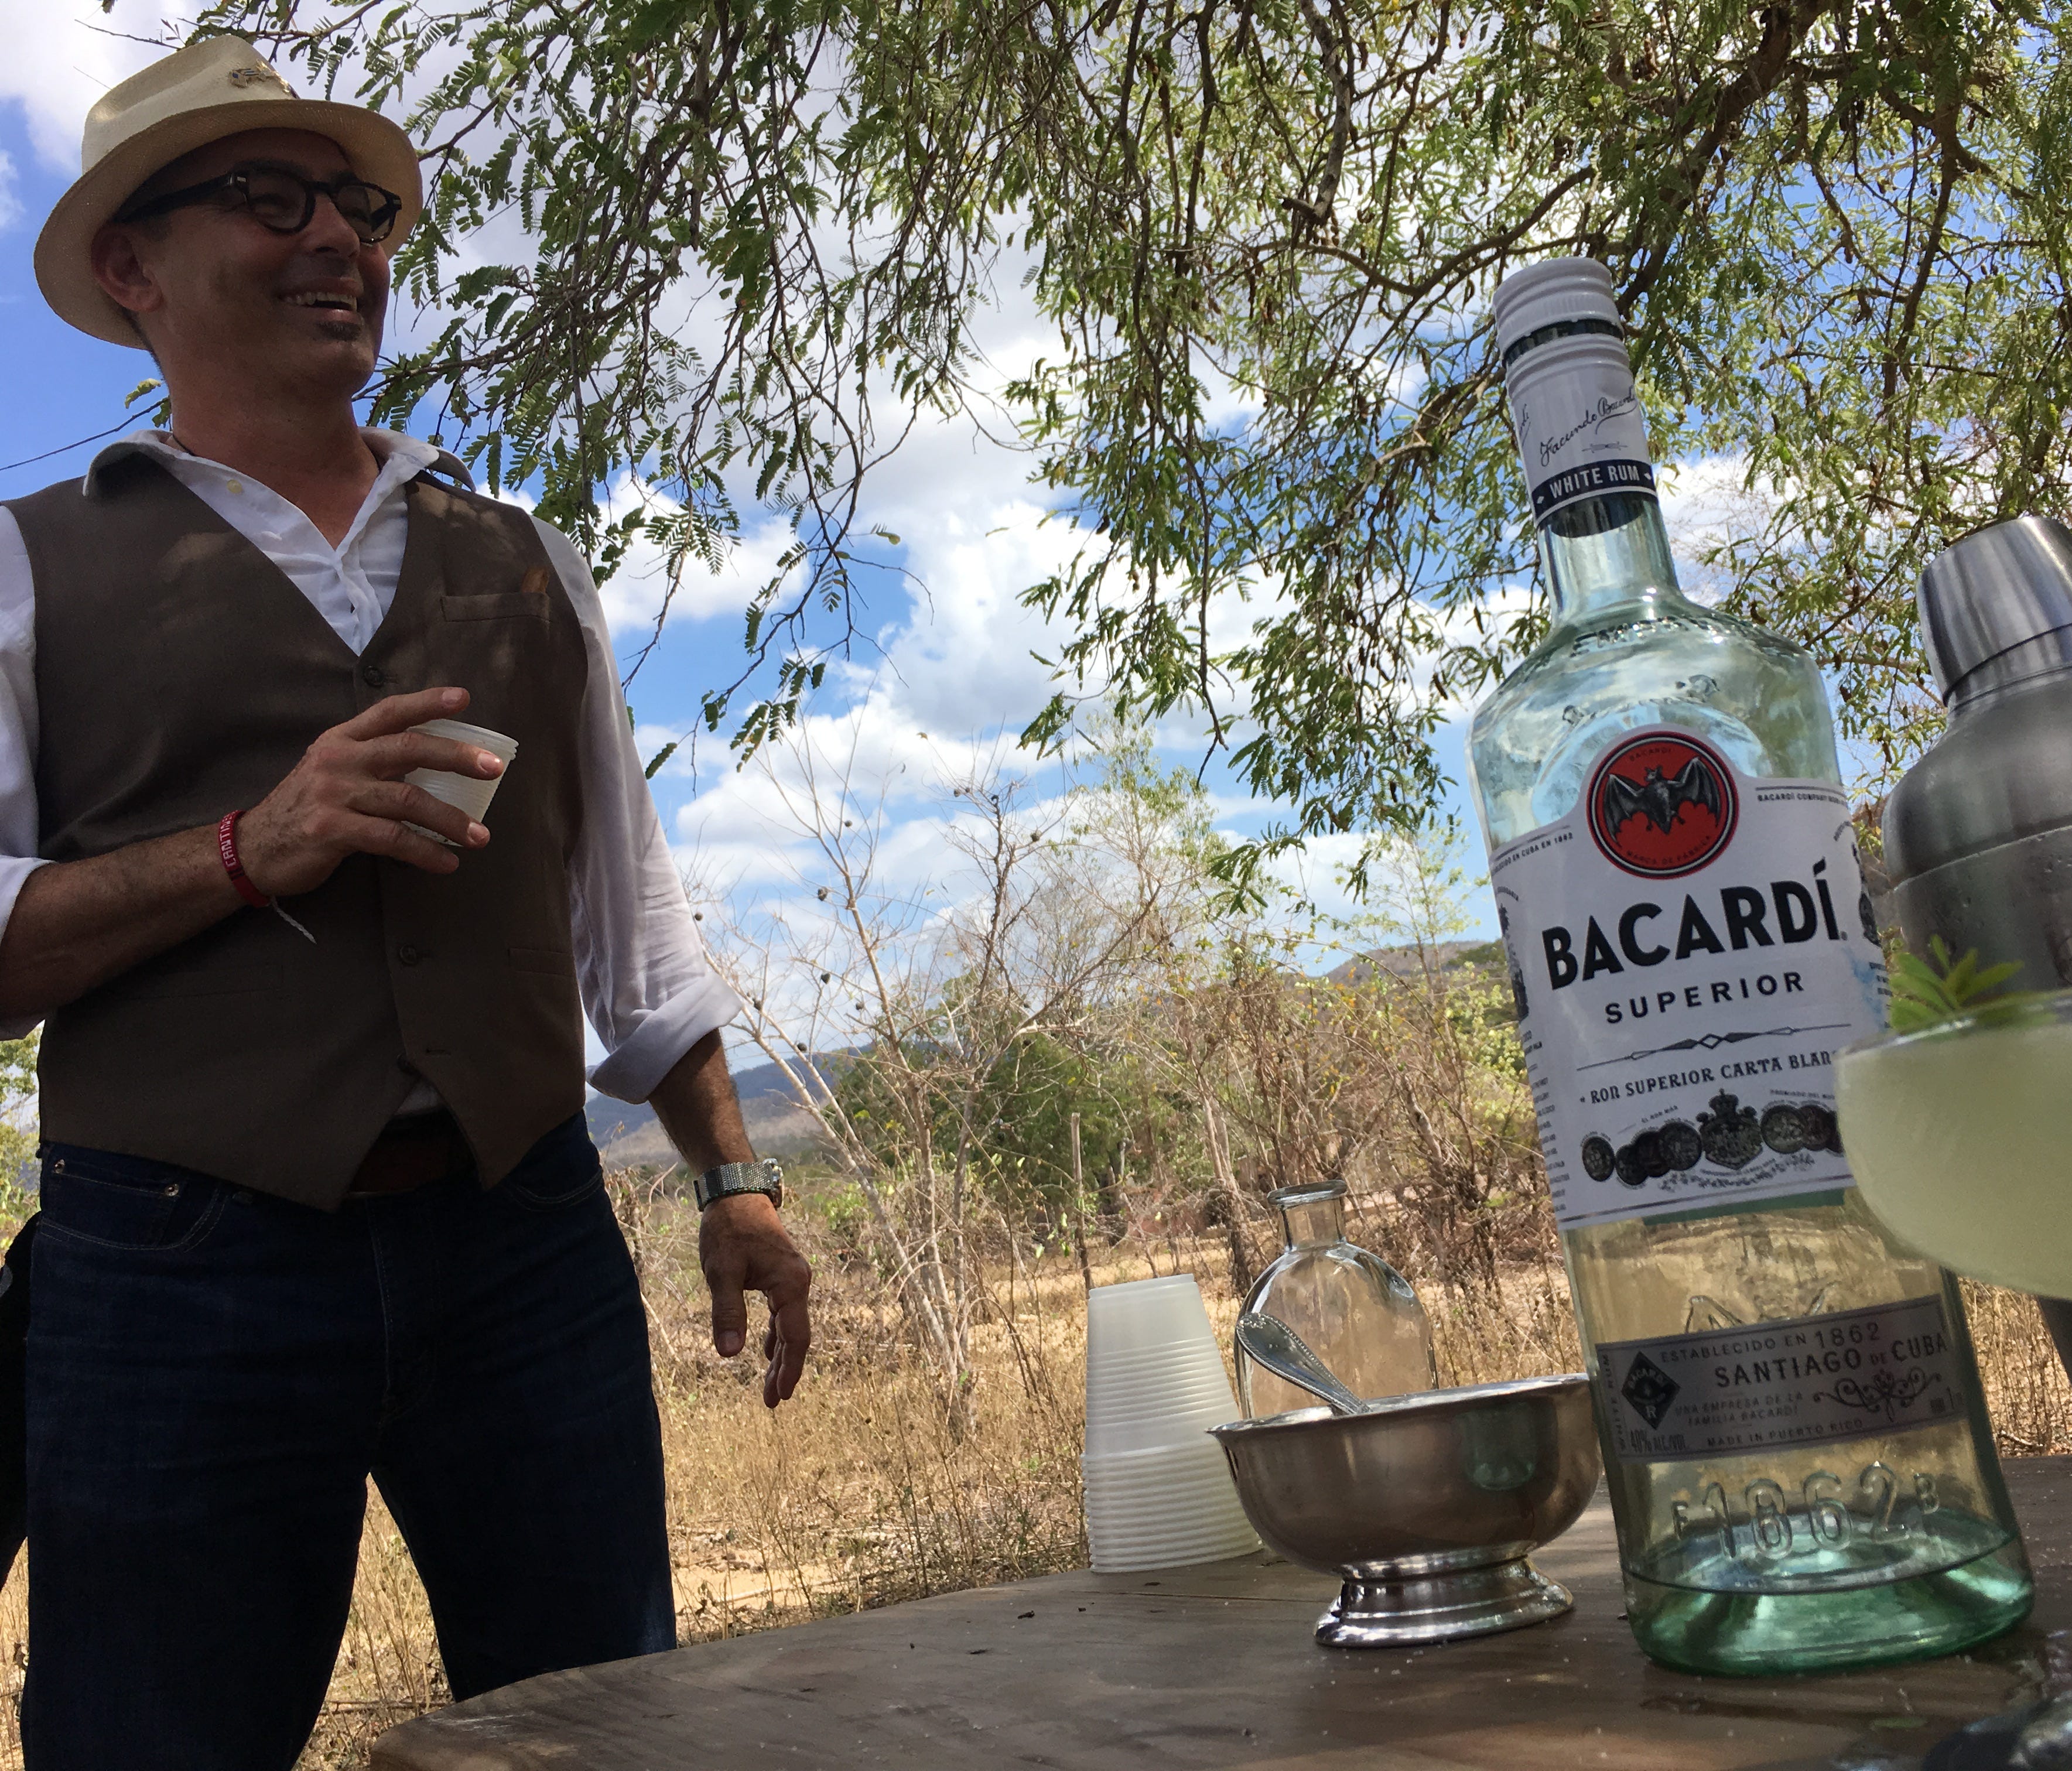 Julio Cabrera, a Miami-based cocktail consultant, mixes a daiquiri in the town of Daiquiri, Cuba, where the cocktail was created in 1898. Cabrera organizes trips to Cuba with U.S. bartenders to teach them about Cuban cocktail history.